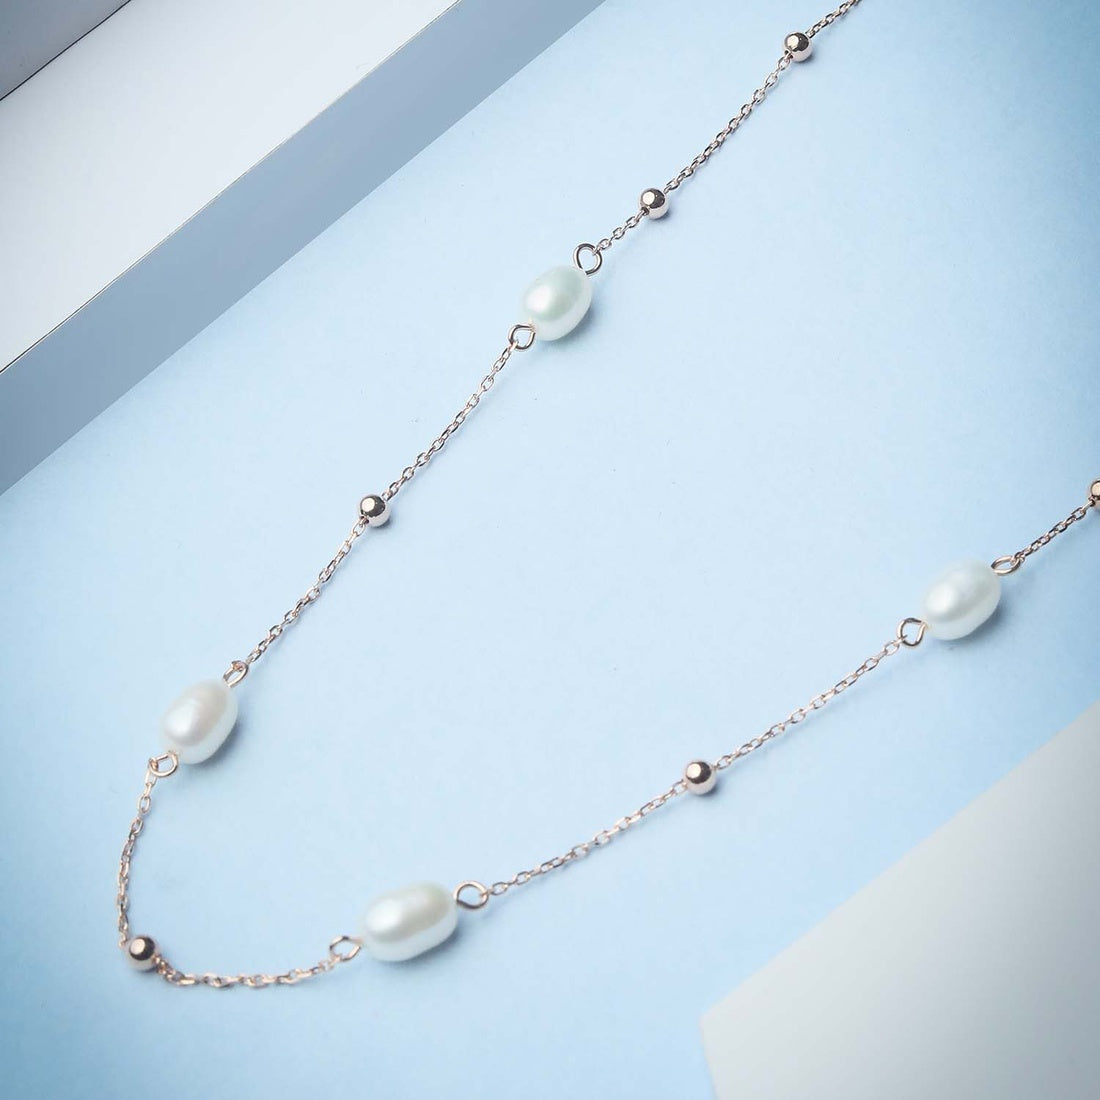 Pearl-fect Rose Gold 925 Silver Necklace